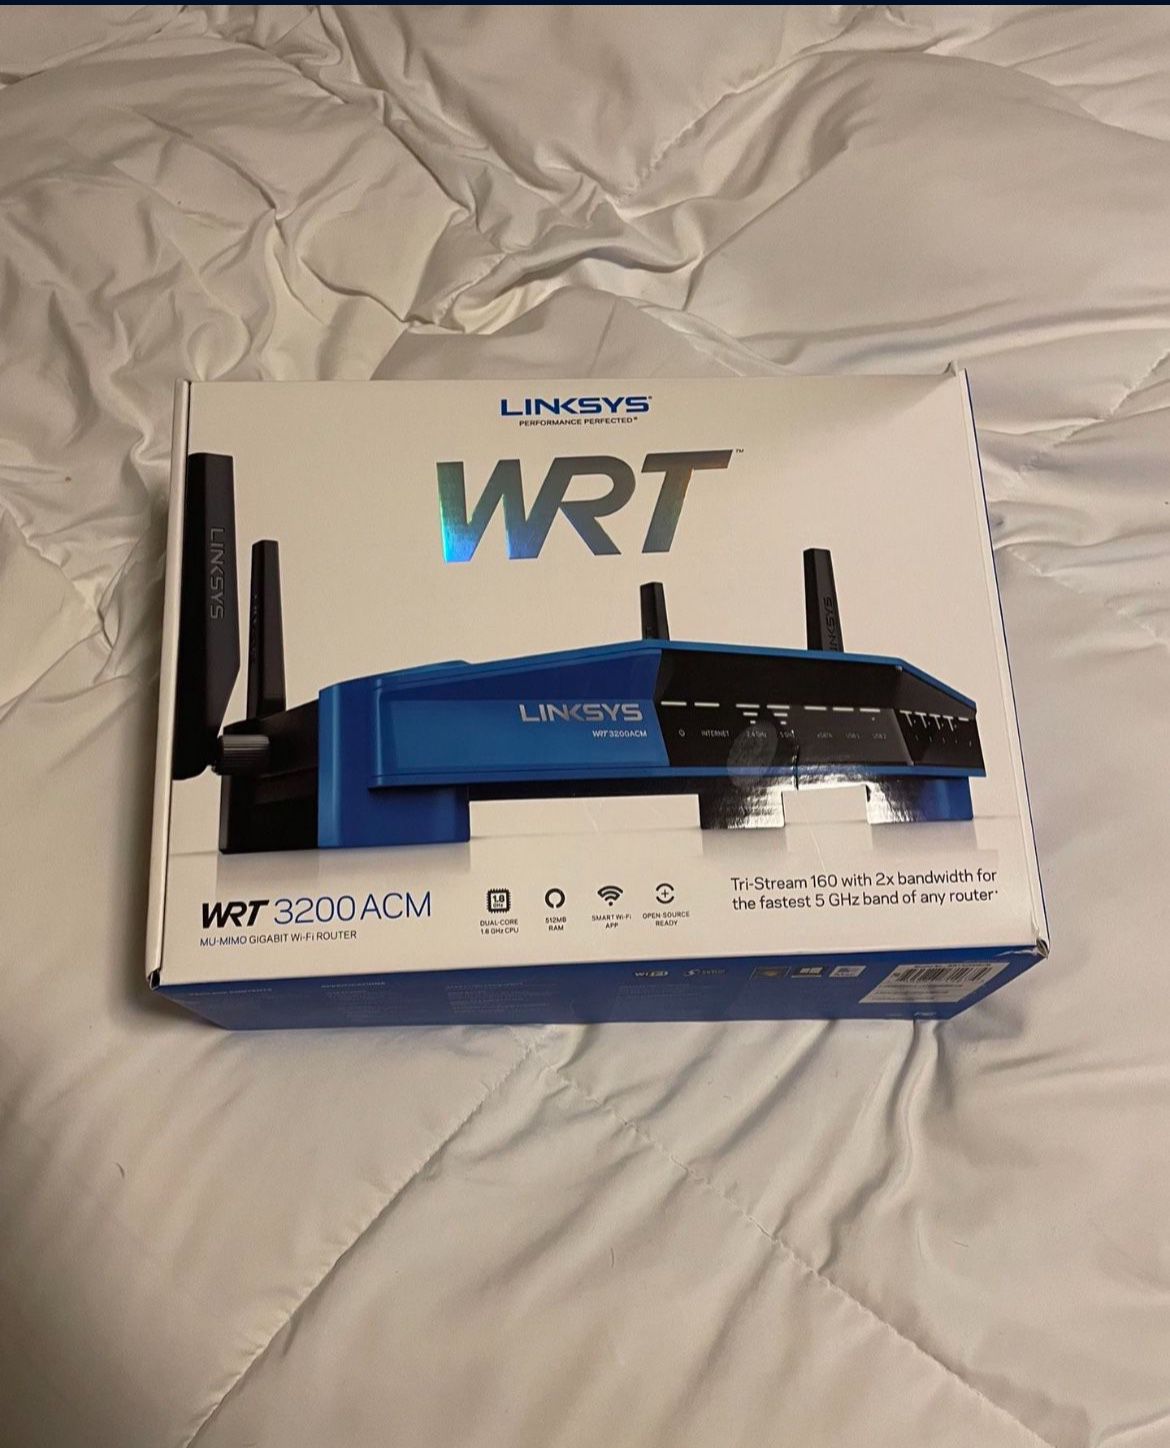 Linksys WRT 3200 ACM Router Perfect Condition 